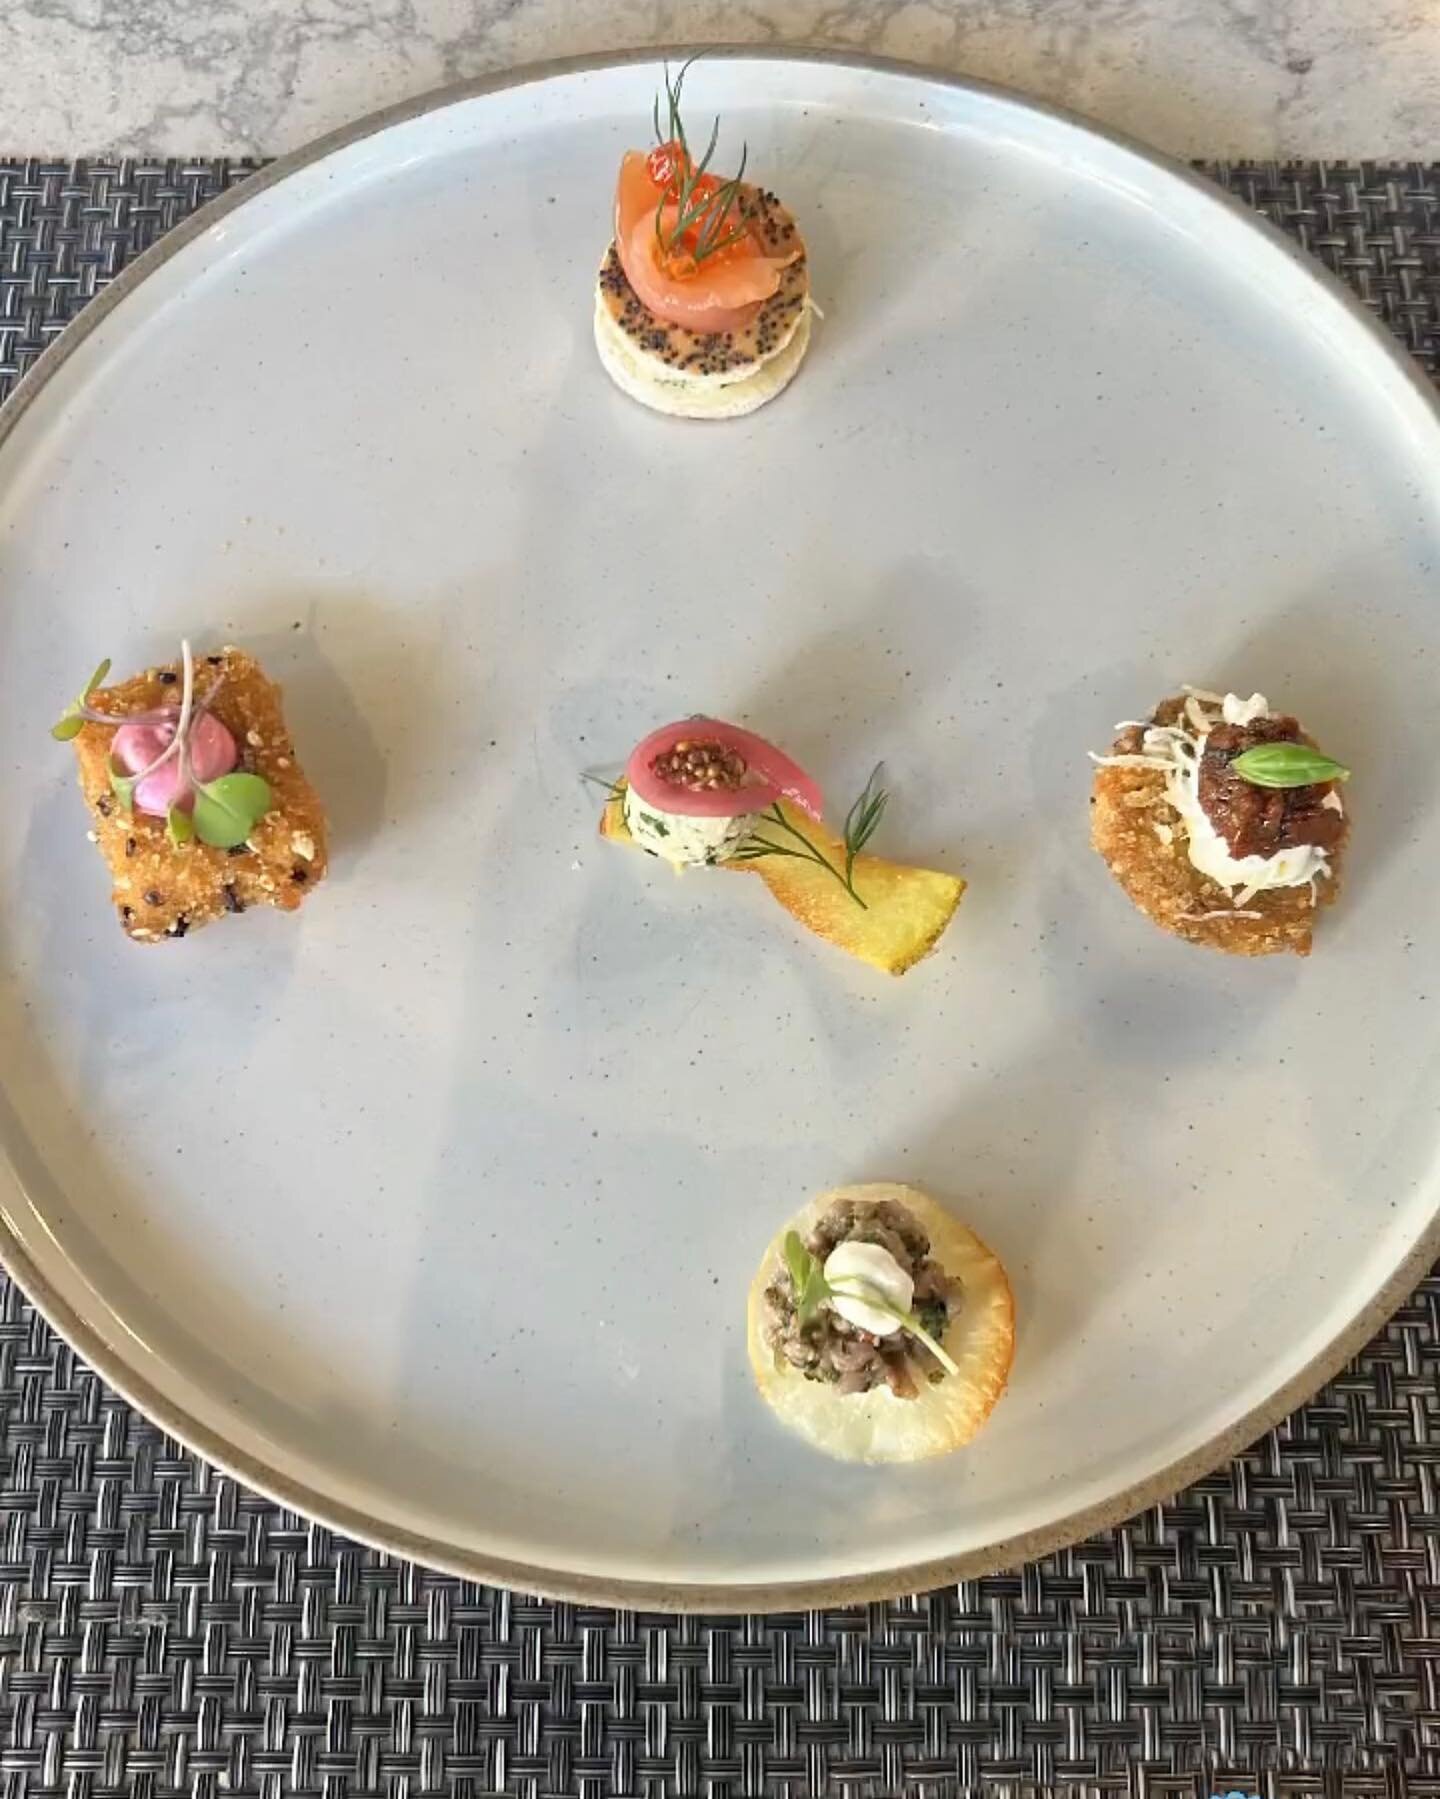 Some beautiful new canap&eacute;s coming up on our events menu 🏅
*
*
*
*
#nyccatering #eventfood #brooklyncatering #healthycatering #nycevents #hamptonsevents #weddingcatering #events #cateringevents